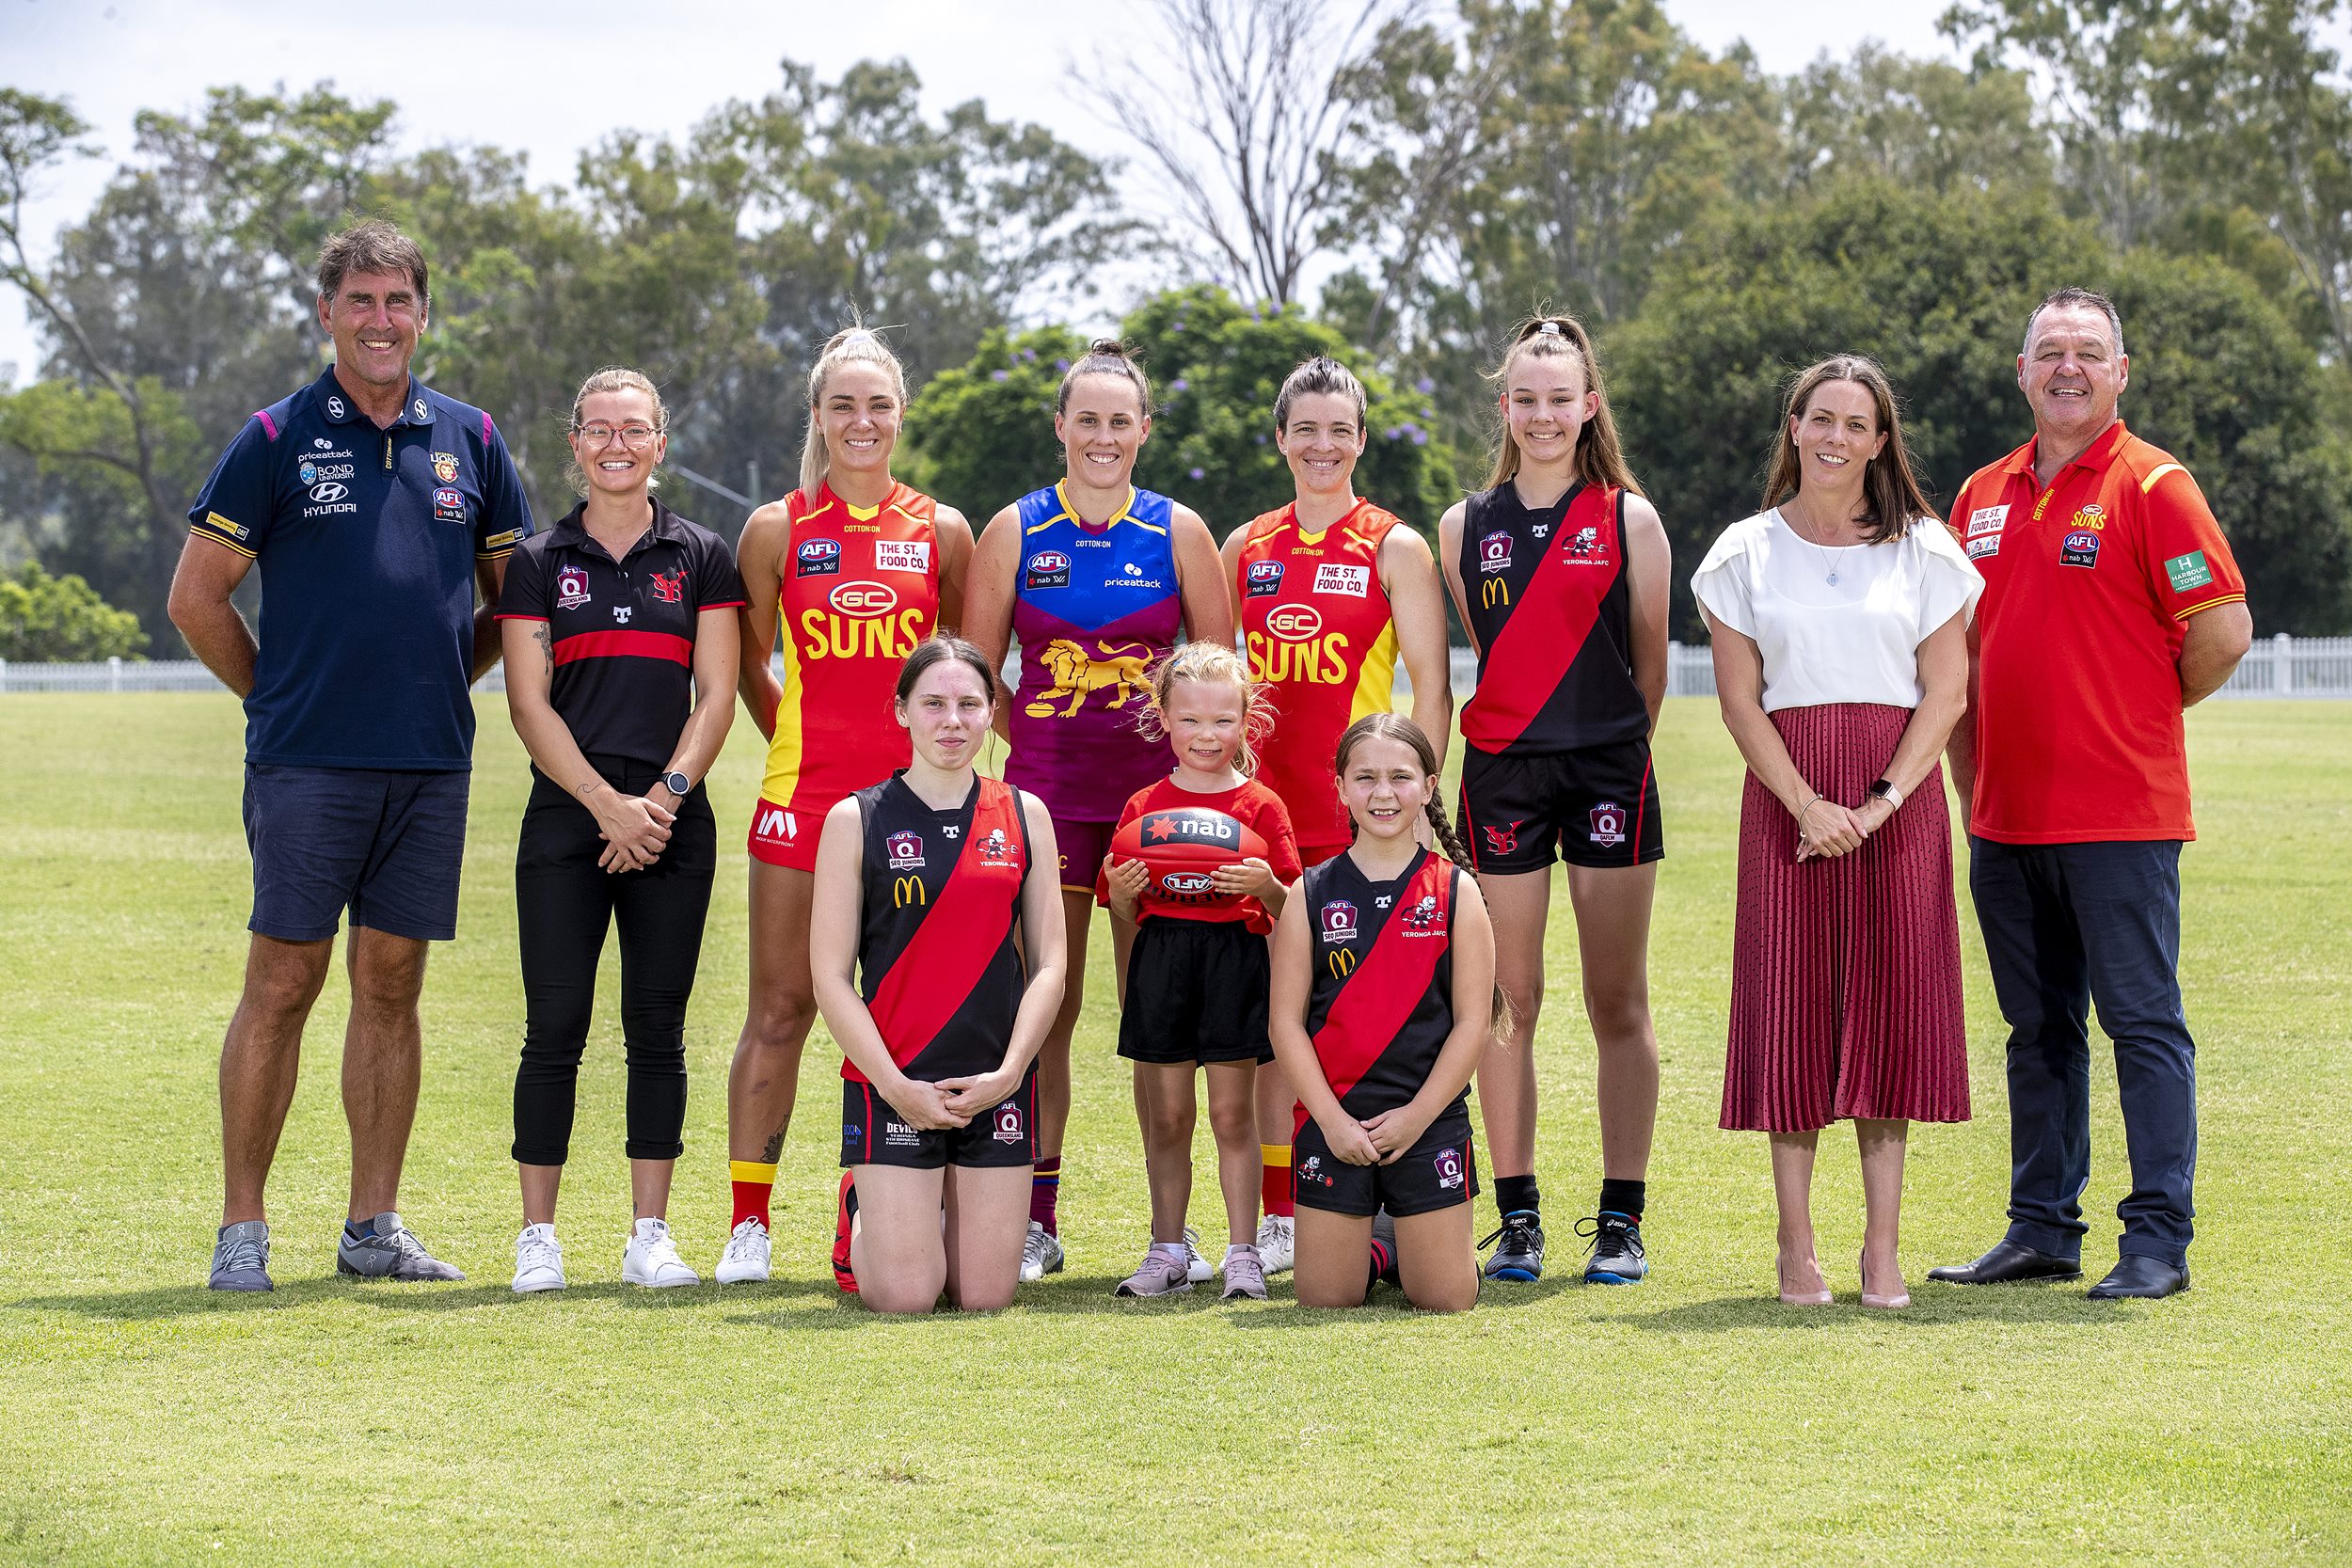 2021 NAB AFL Premiership Cup Ambassador, Jamie Howell, who was present alongside Head of AFL Queensland Trisha Squires. Howell and Squires were also joined by Brisbane Lions Captain Emma Zielke, Brisbane Lions AFLW Coach Craig Starcevich, Gold Coast SUNS Captains Sam Virgo & Hannah Dunn, and David Lake Gold Coast SUNS AFLW Coach.